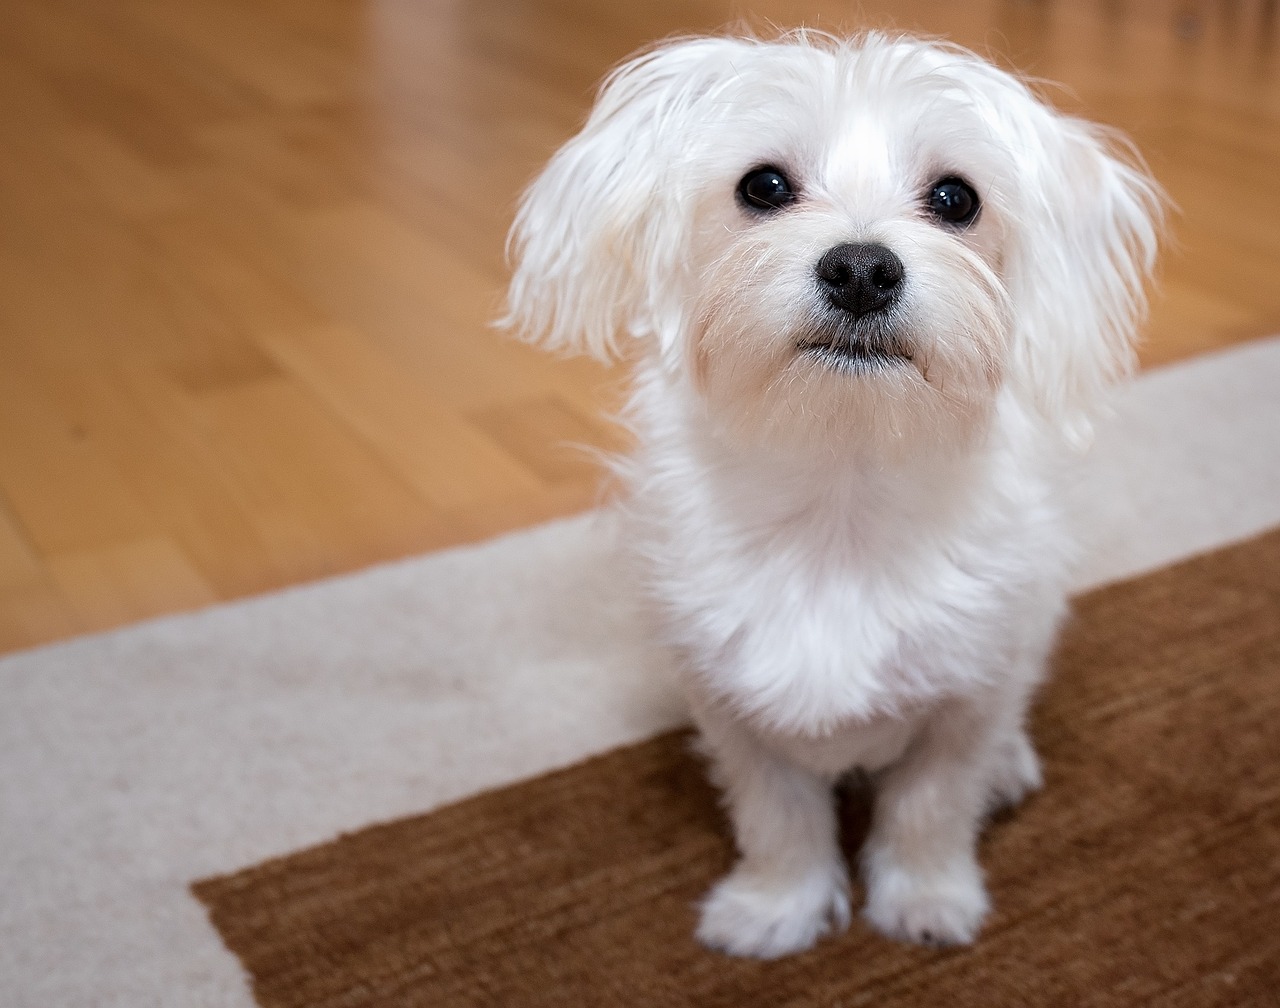 Maltese are the perfect dogs for first time owners